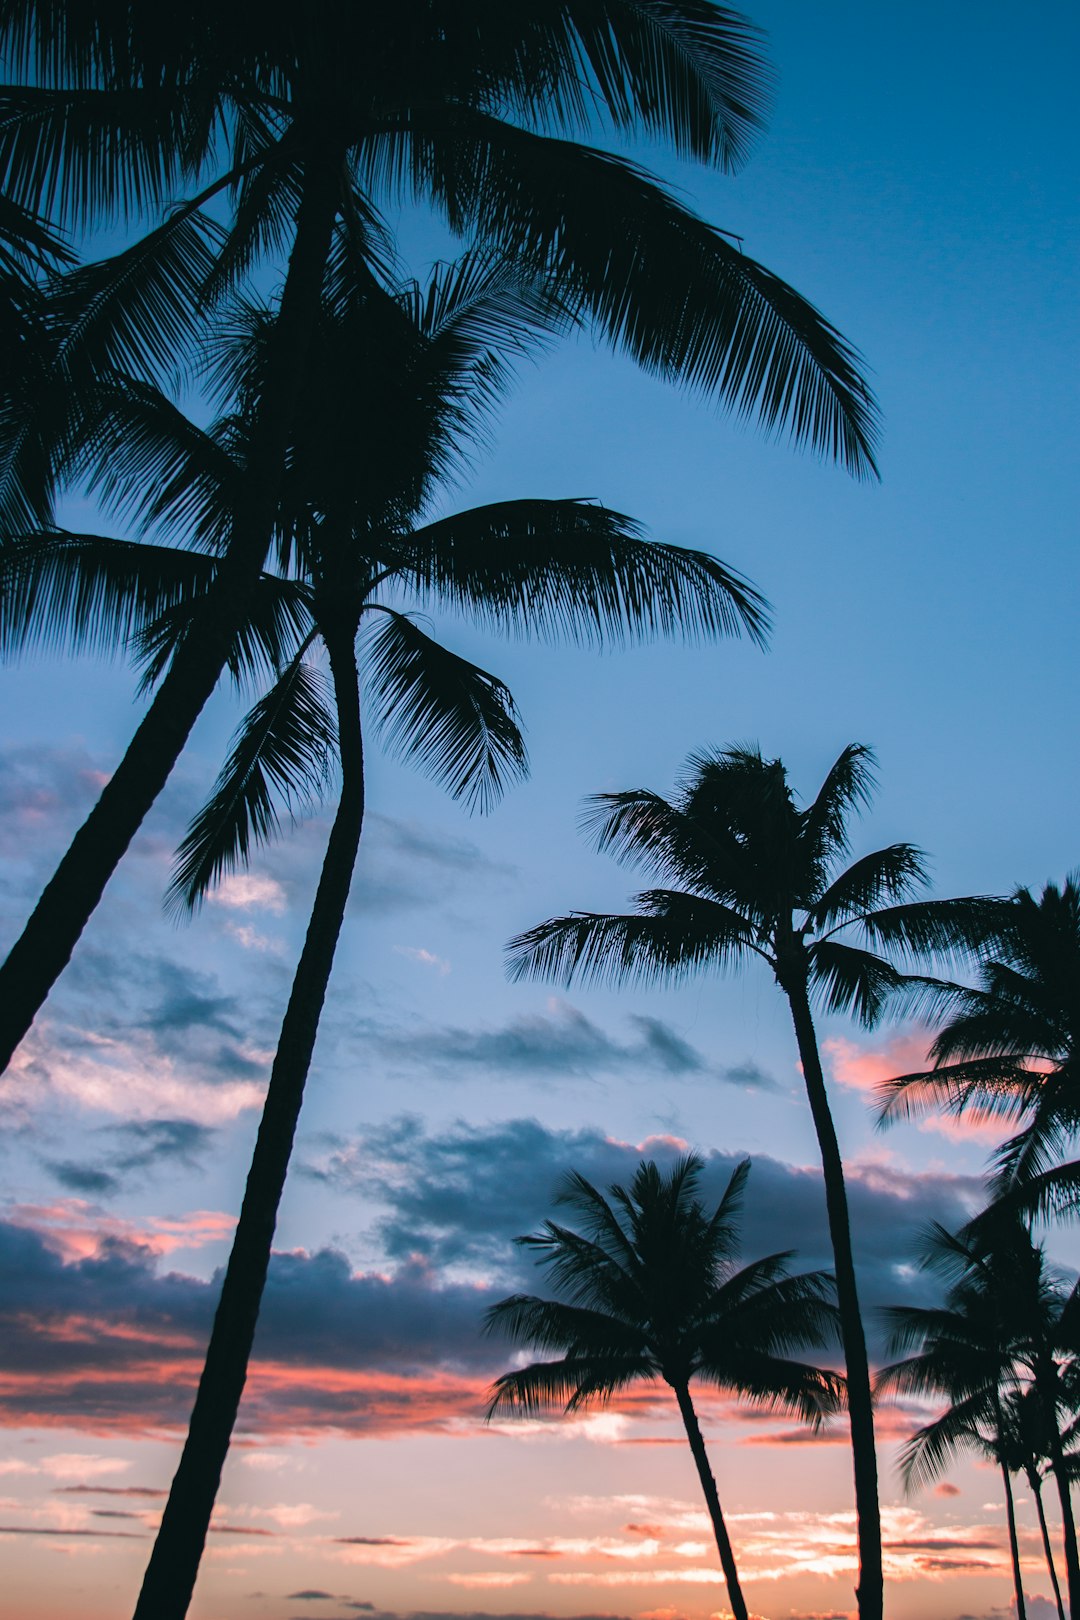 900+ Palm Tree Background Images: Download HD Backgrounds on Unsplash